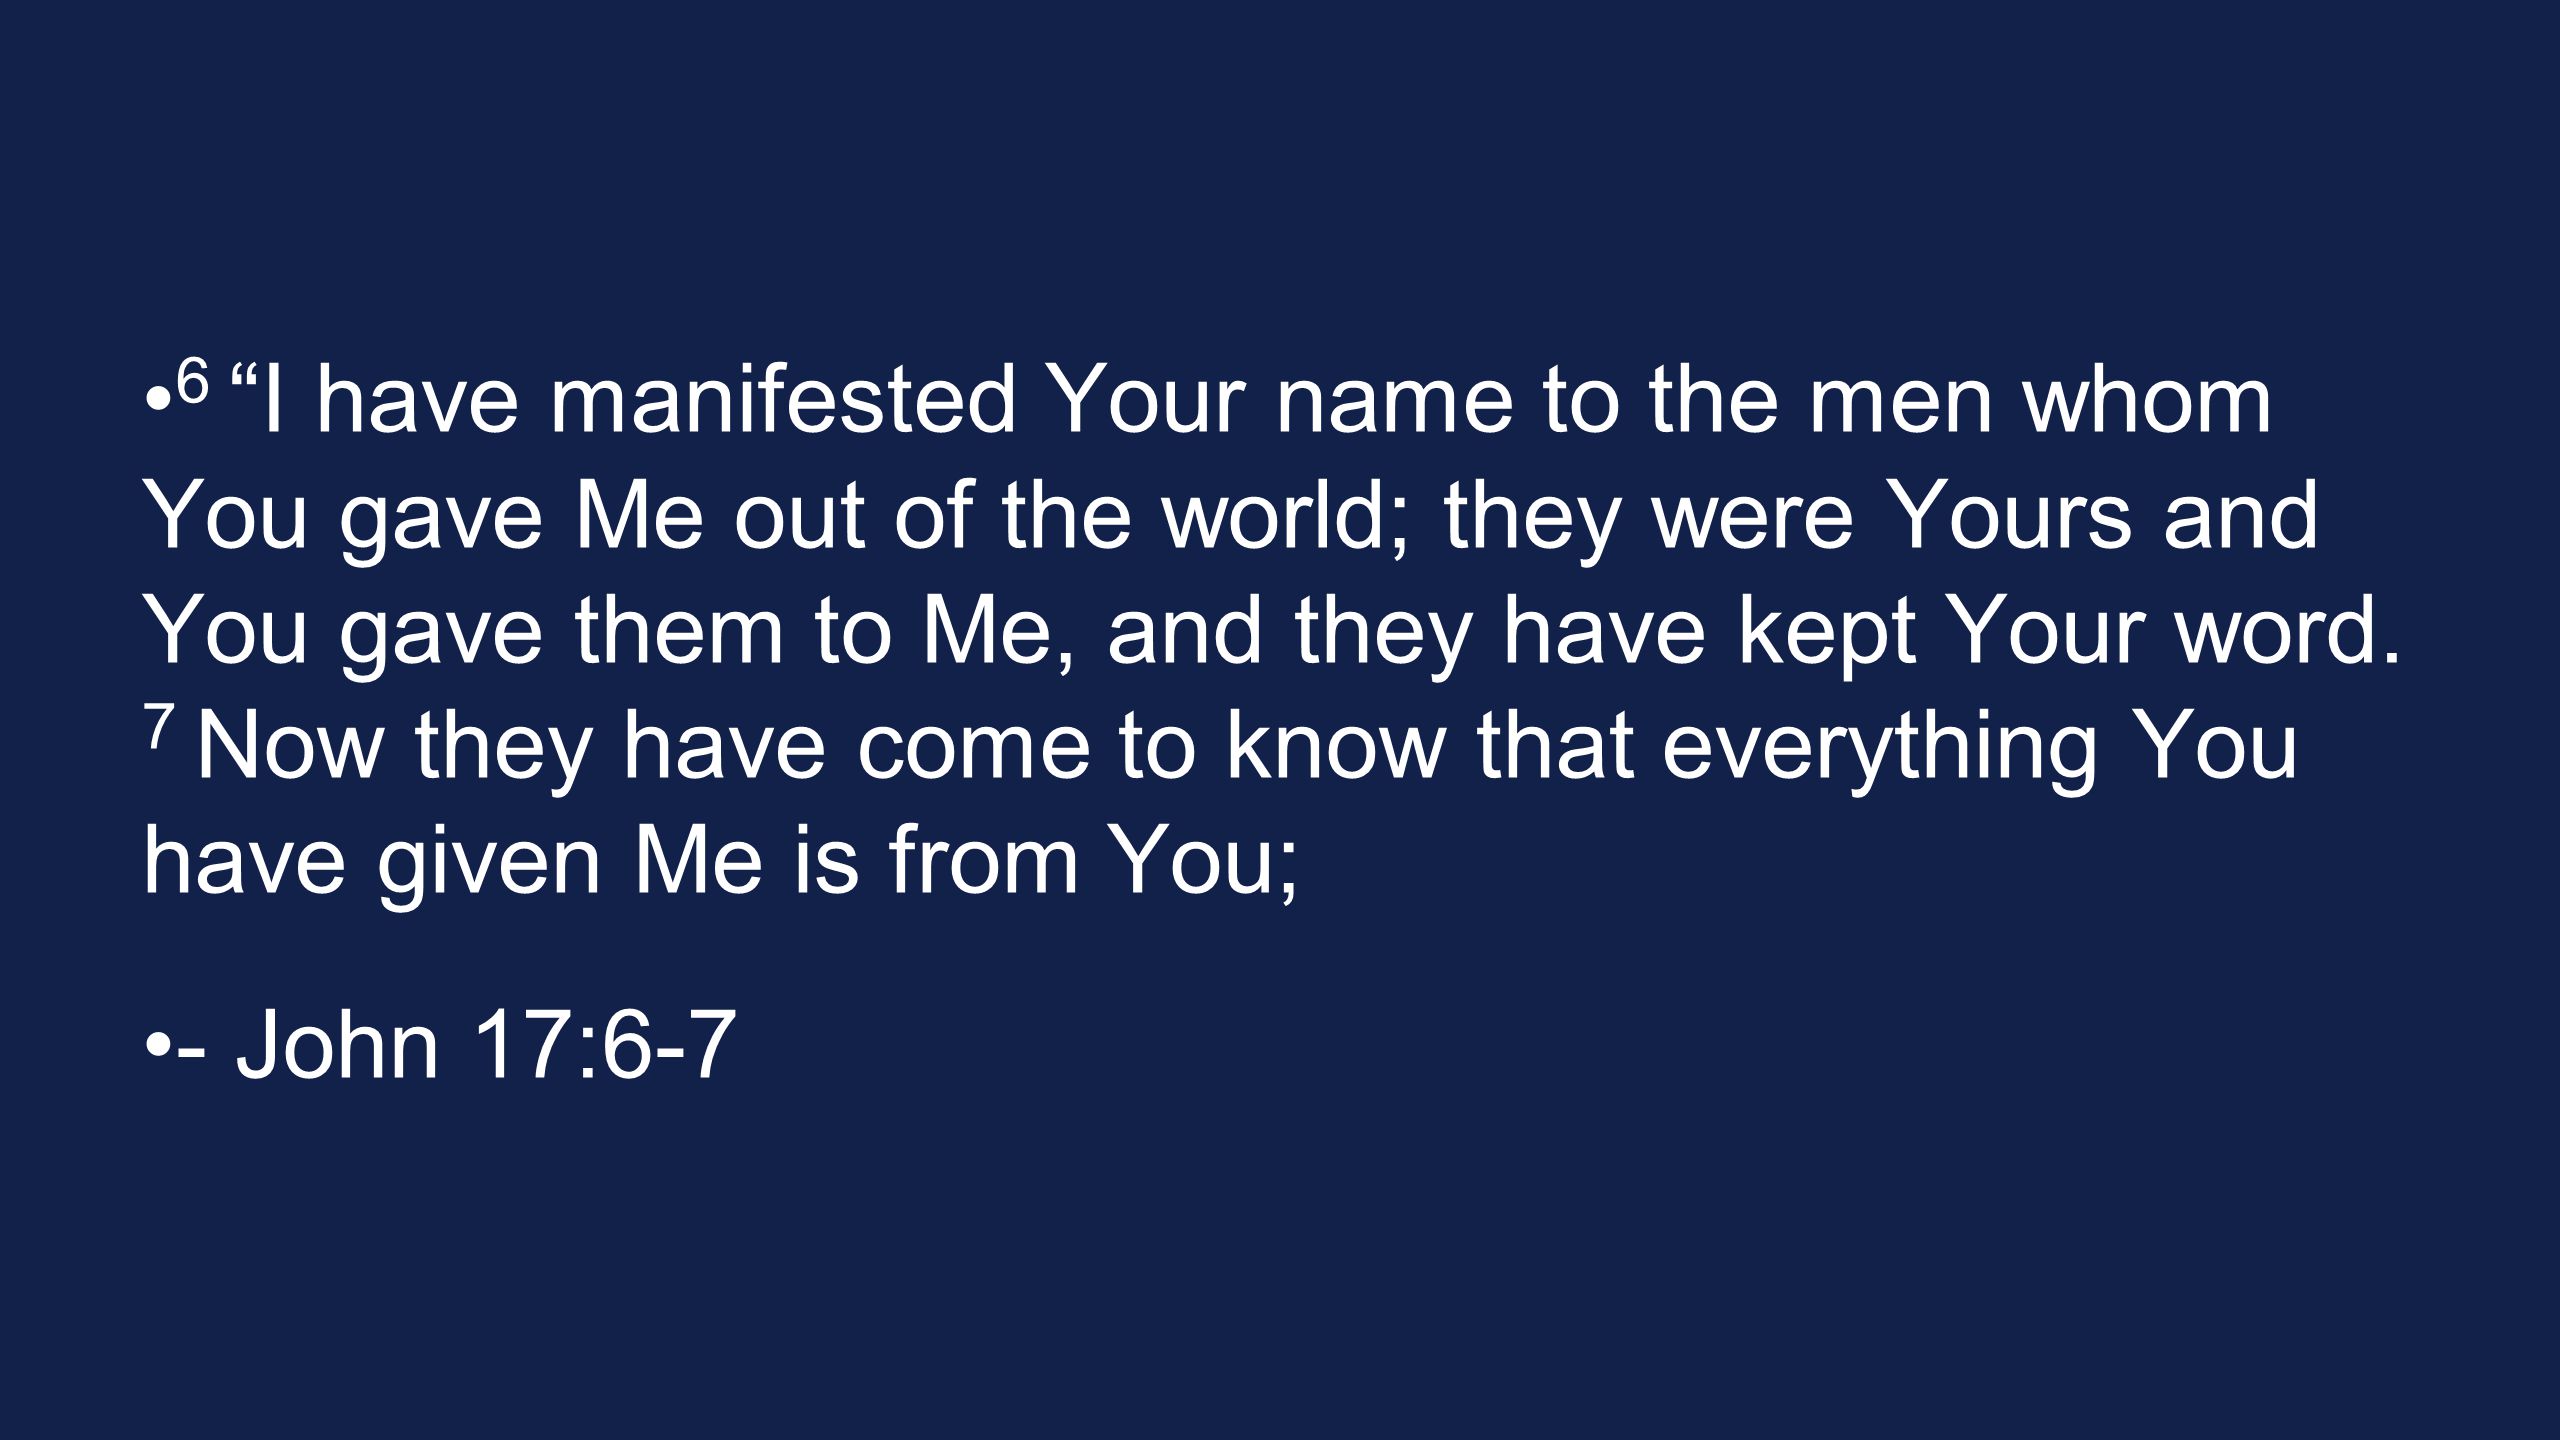 6 I have manifested Your name to the men whom You gave Me out of the world; they were Yours and You gave them to Me, and they have kept Your word. 7 Now they have come to know that everything You have given Me is from You;